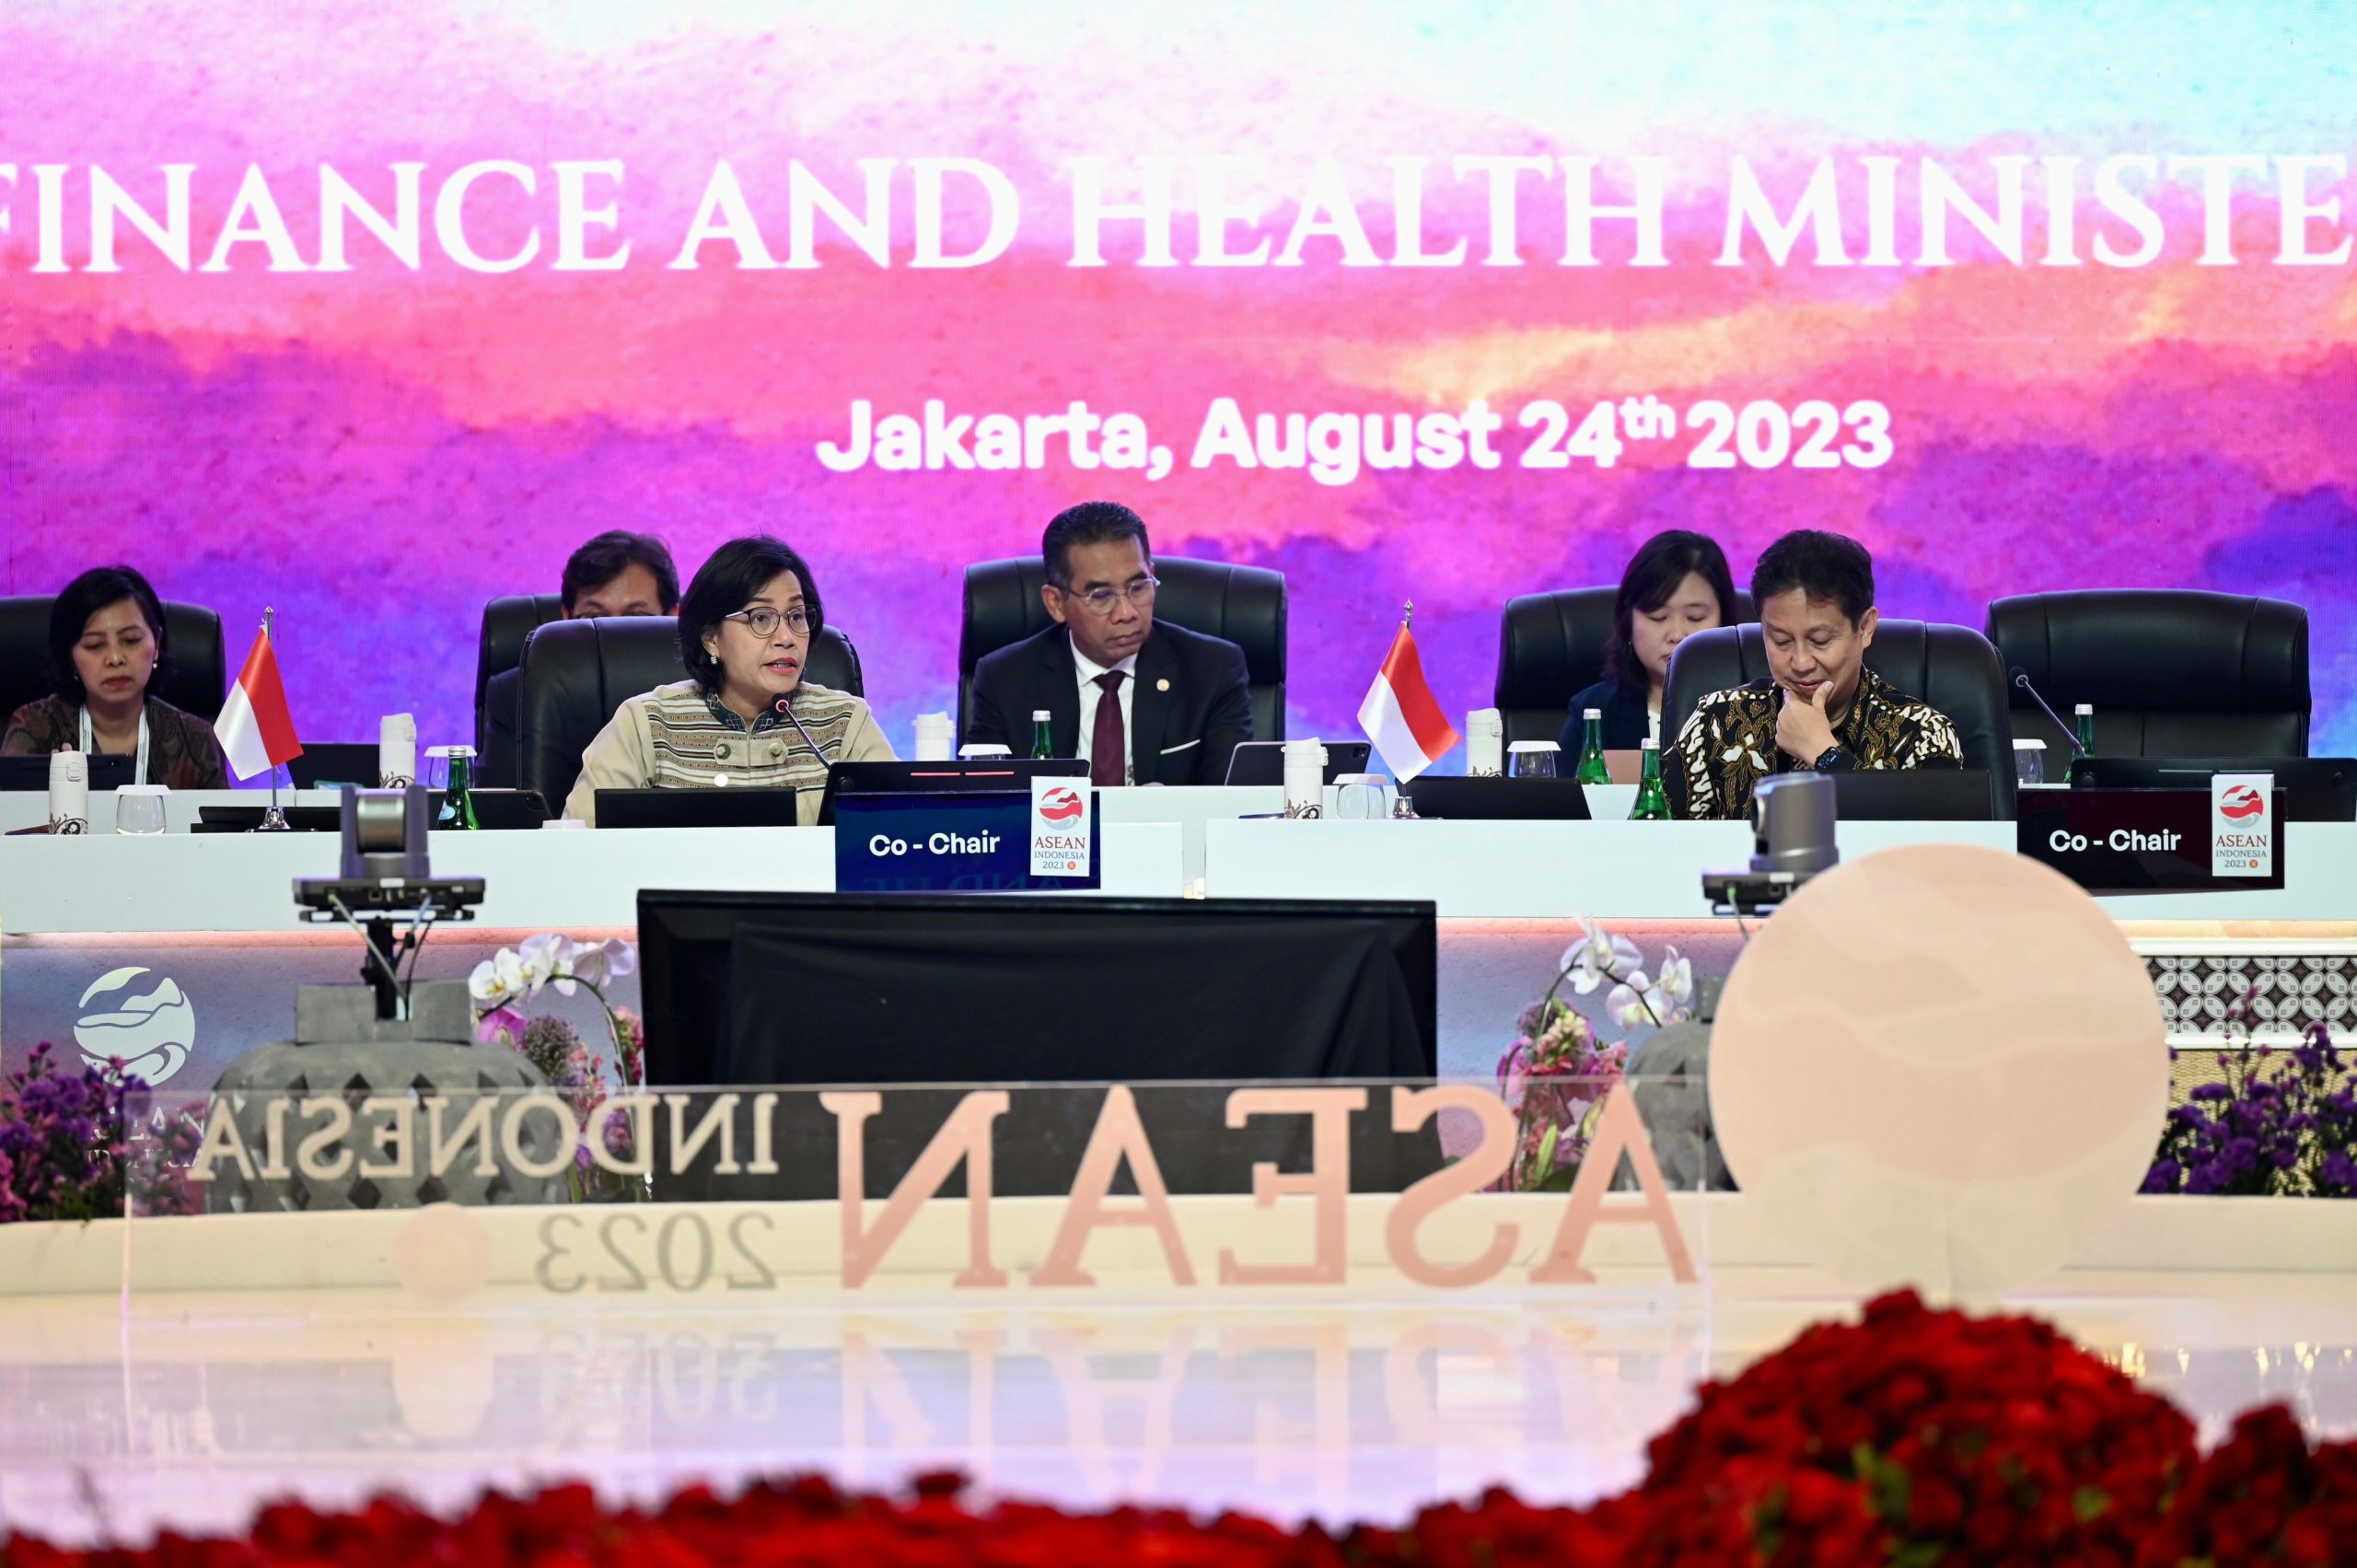 Joint Statement of the ASEAN Finance and Health Ministers’ Meeting (AFHMM)